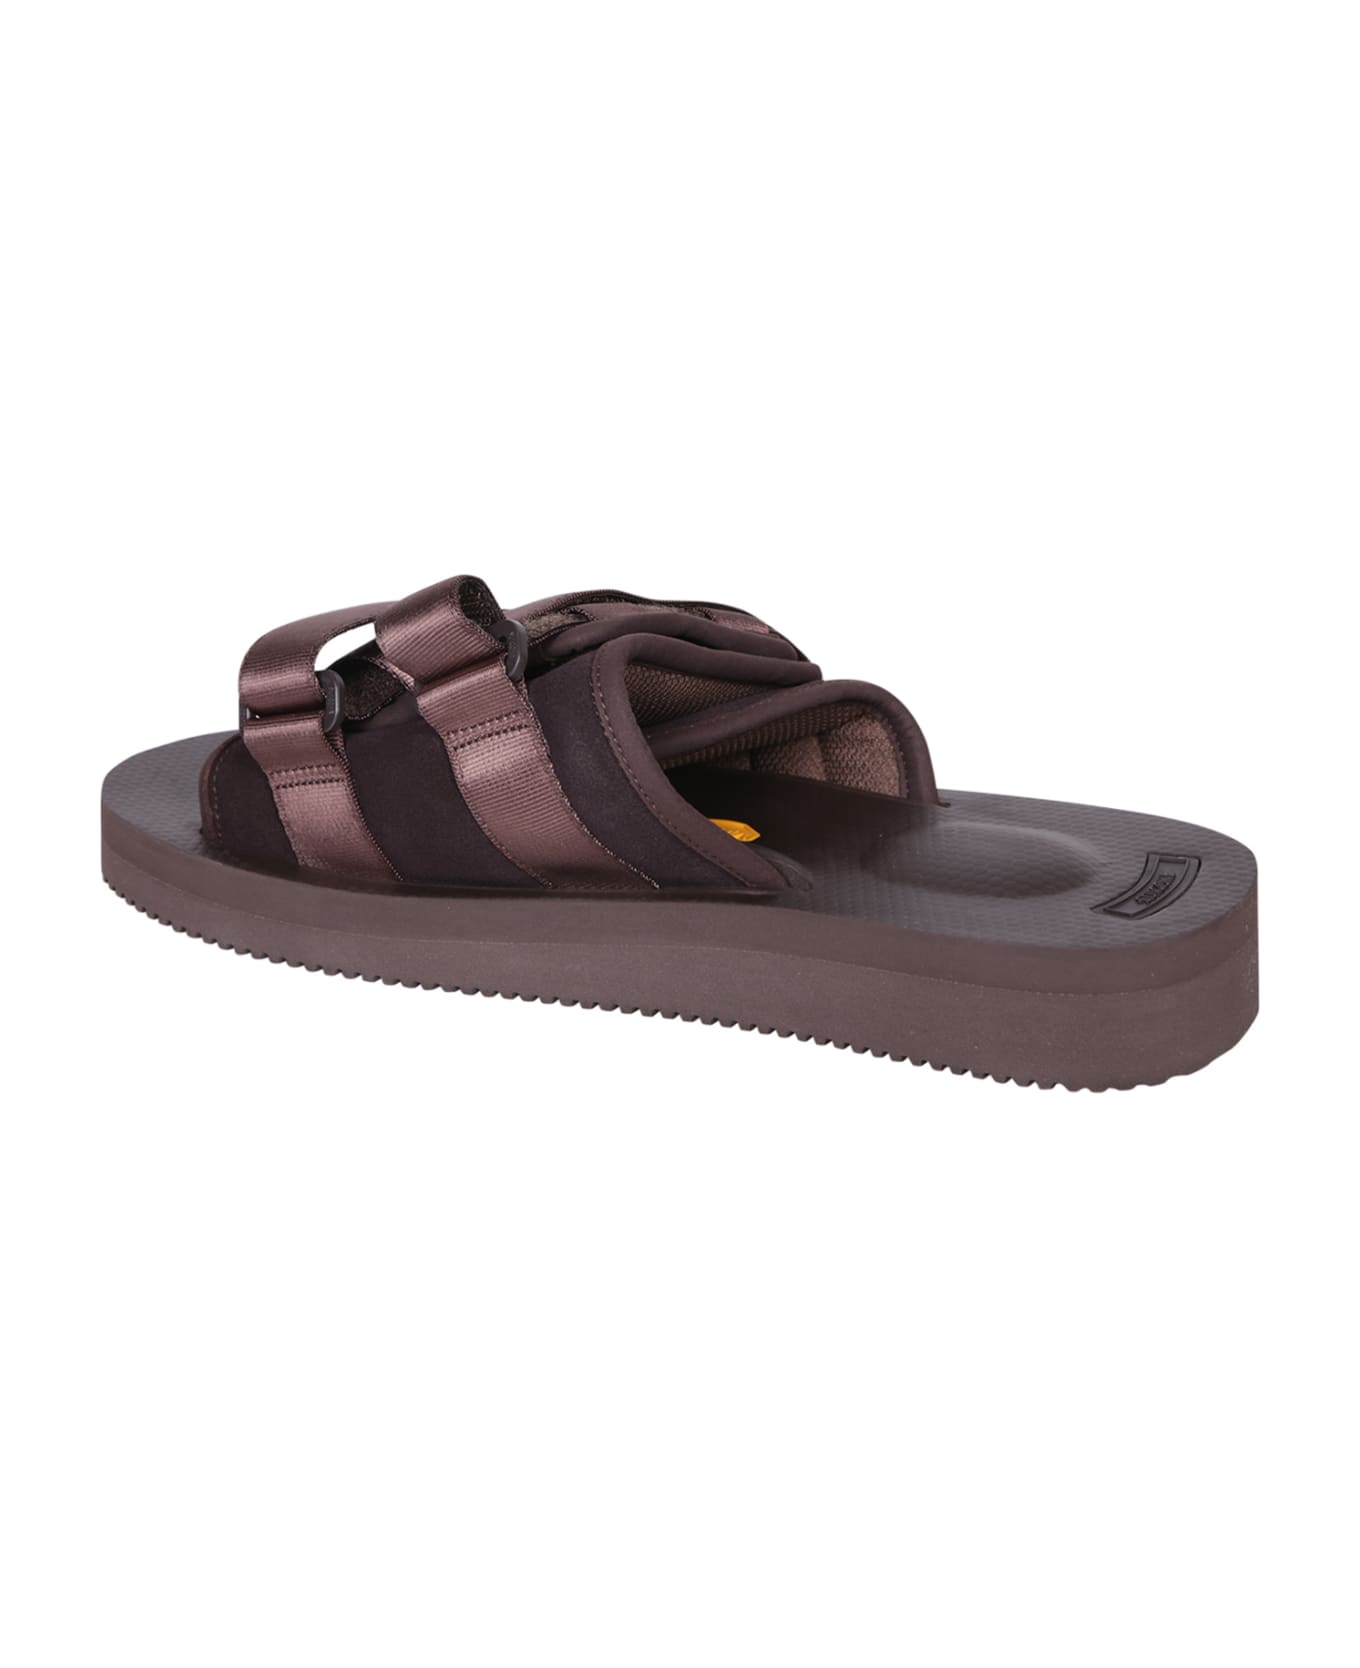 SUICOKE Moto Cab Brown Sandals - Brown その他各種シューズ